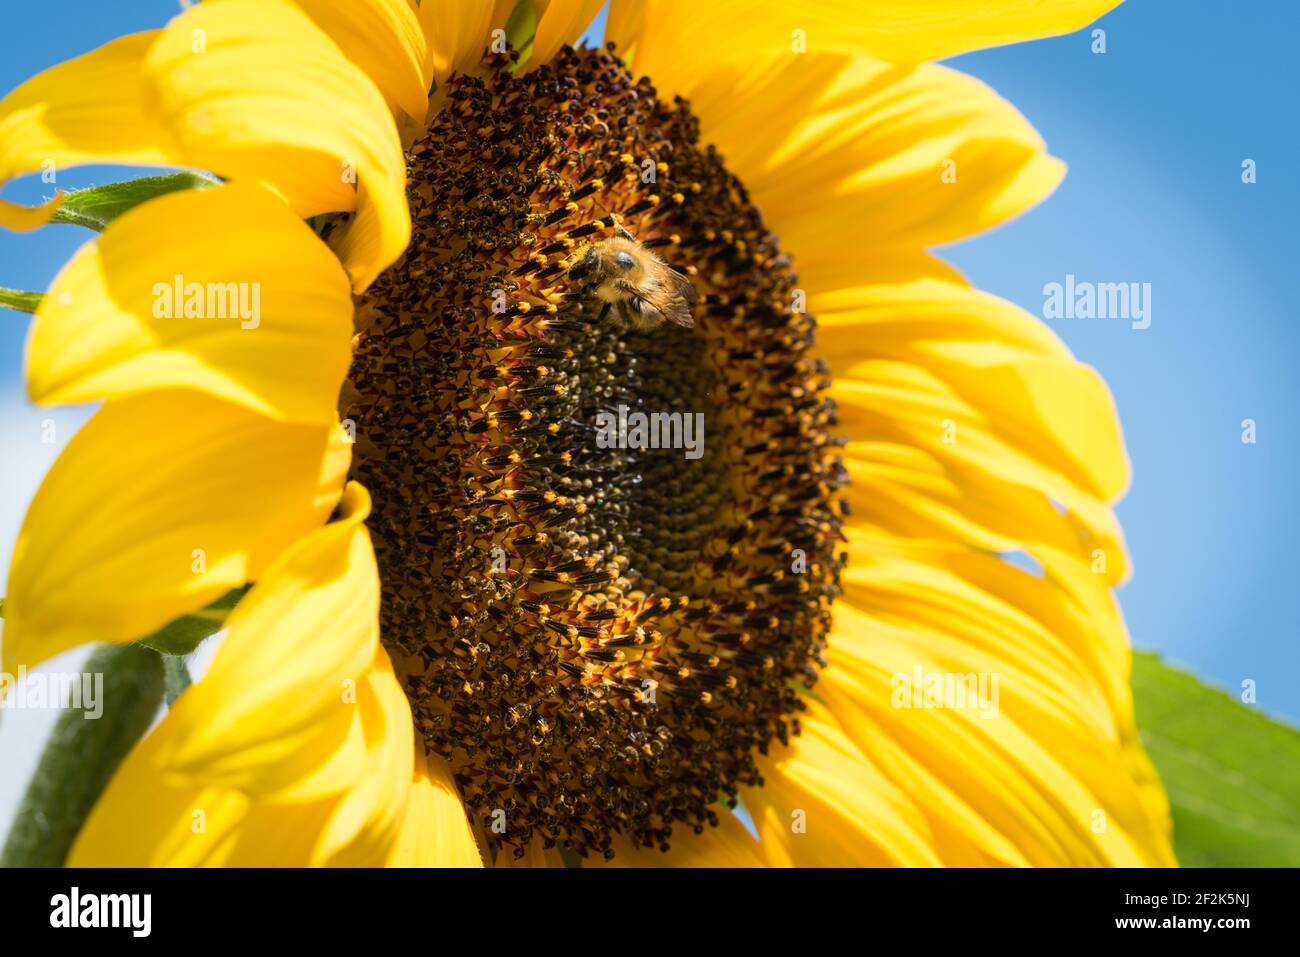 Common carder bee (Bombus pascuorum) on a sunflower (helianthus) in a garden in Exeter, Devon, UK. Stock Photo